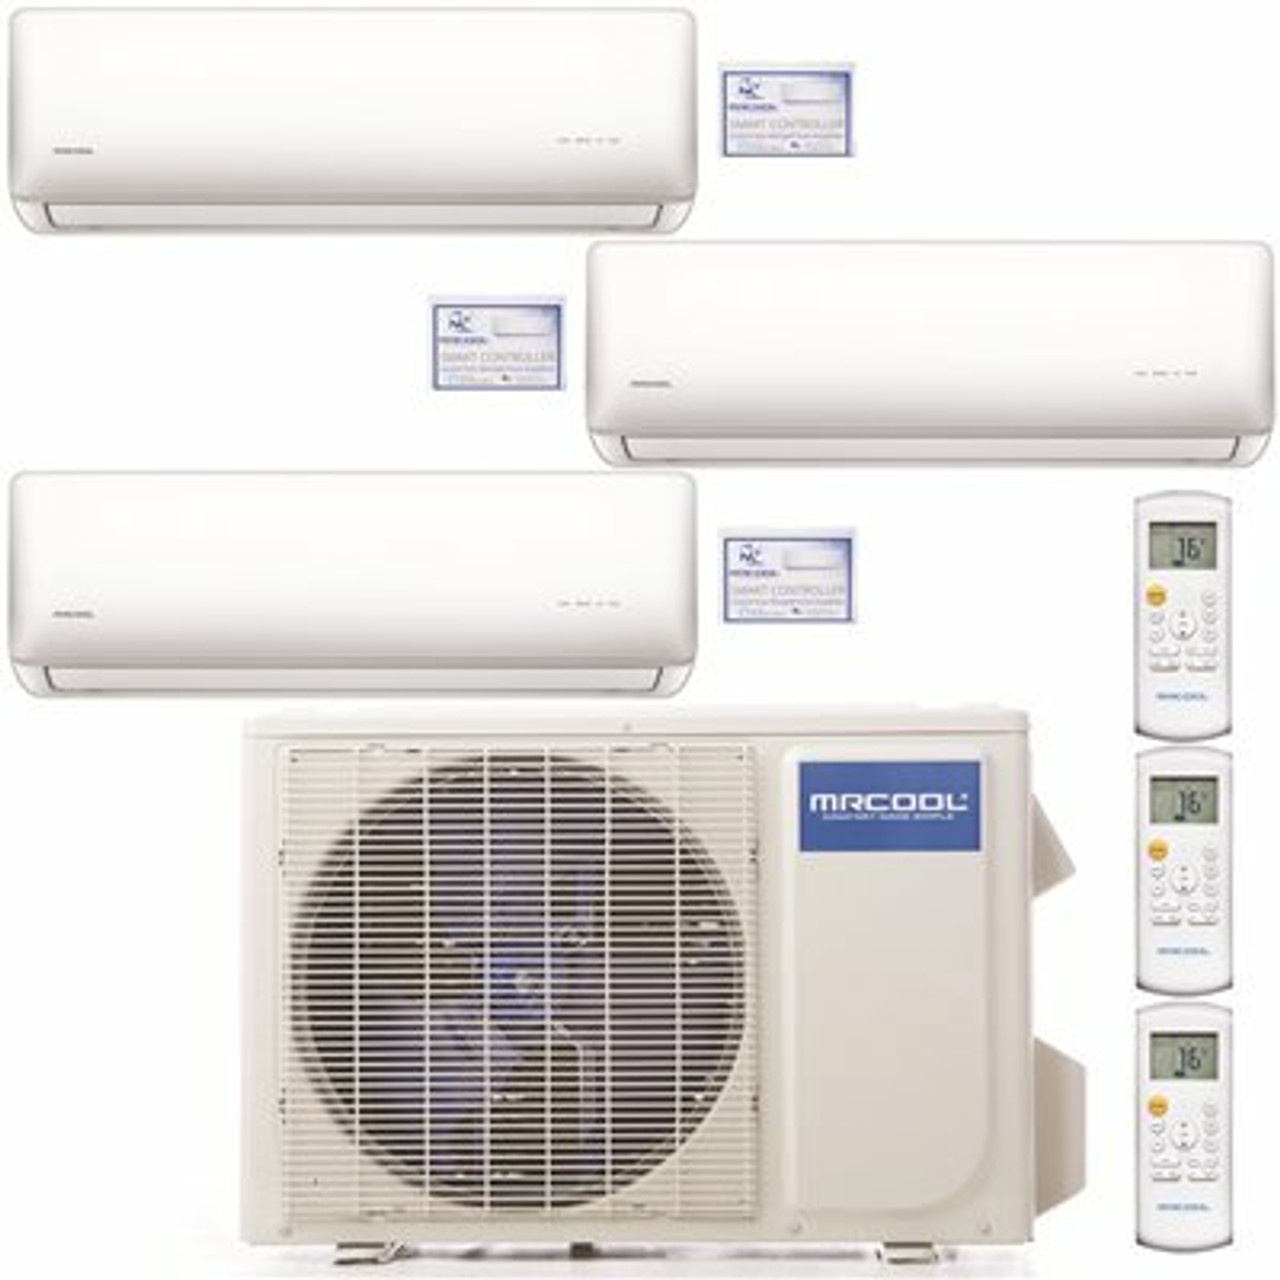 Mrcool Olympus 33,000 Btu 2.75 Ton 3-Zone Ductless Mini-Split Air Conditioner And Heat Pump, 25 Ft. Install Kit - 230V/60Hz